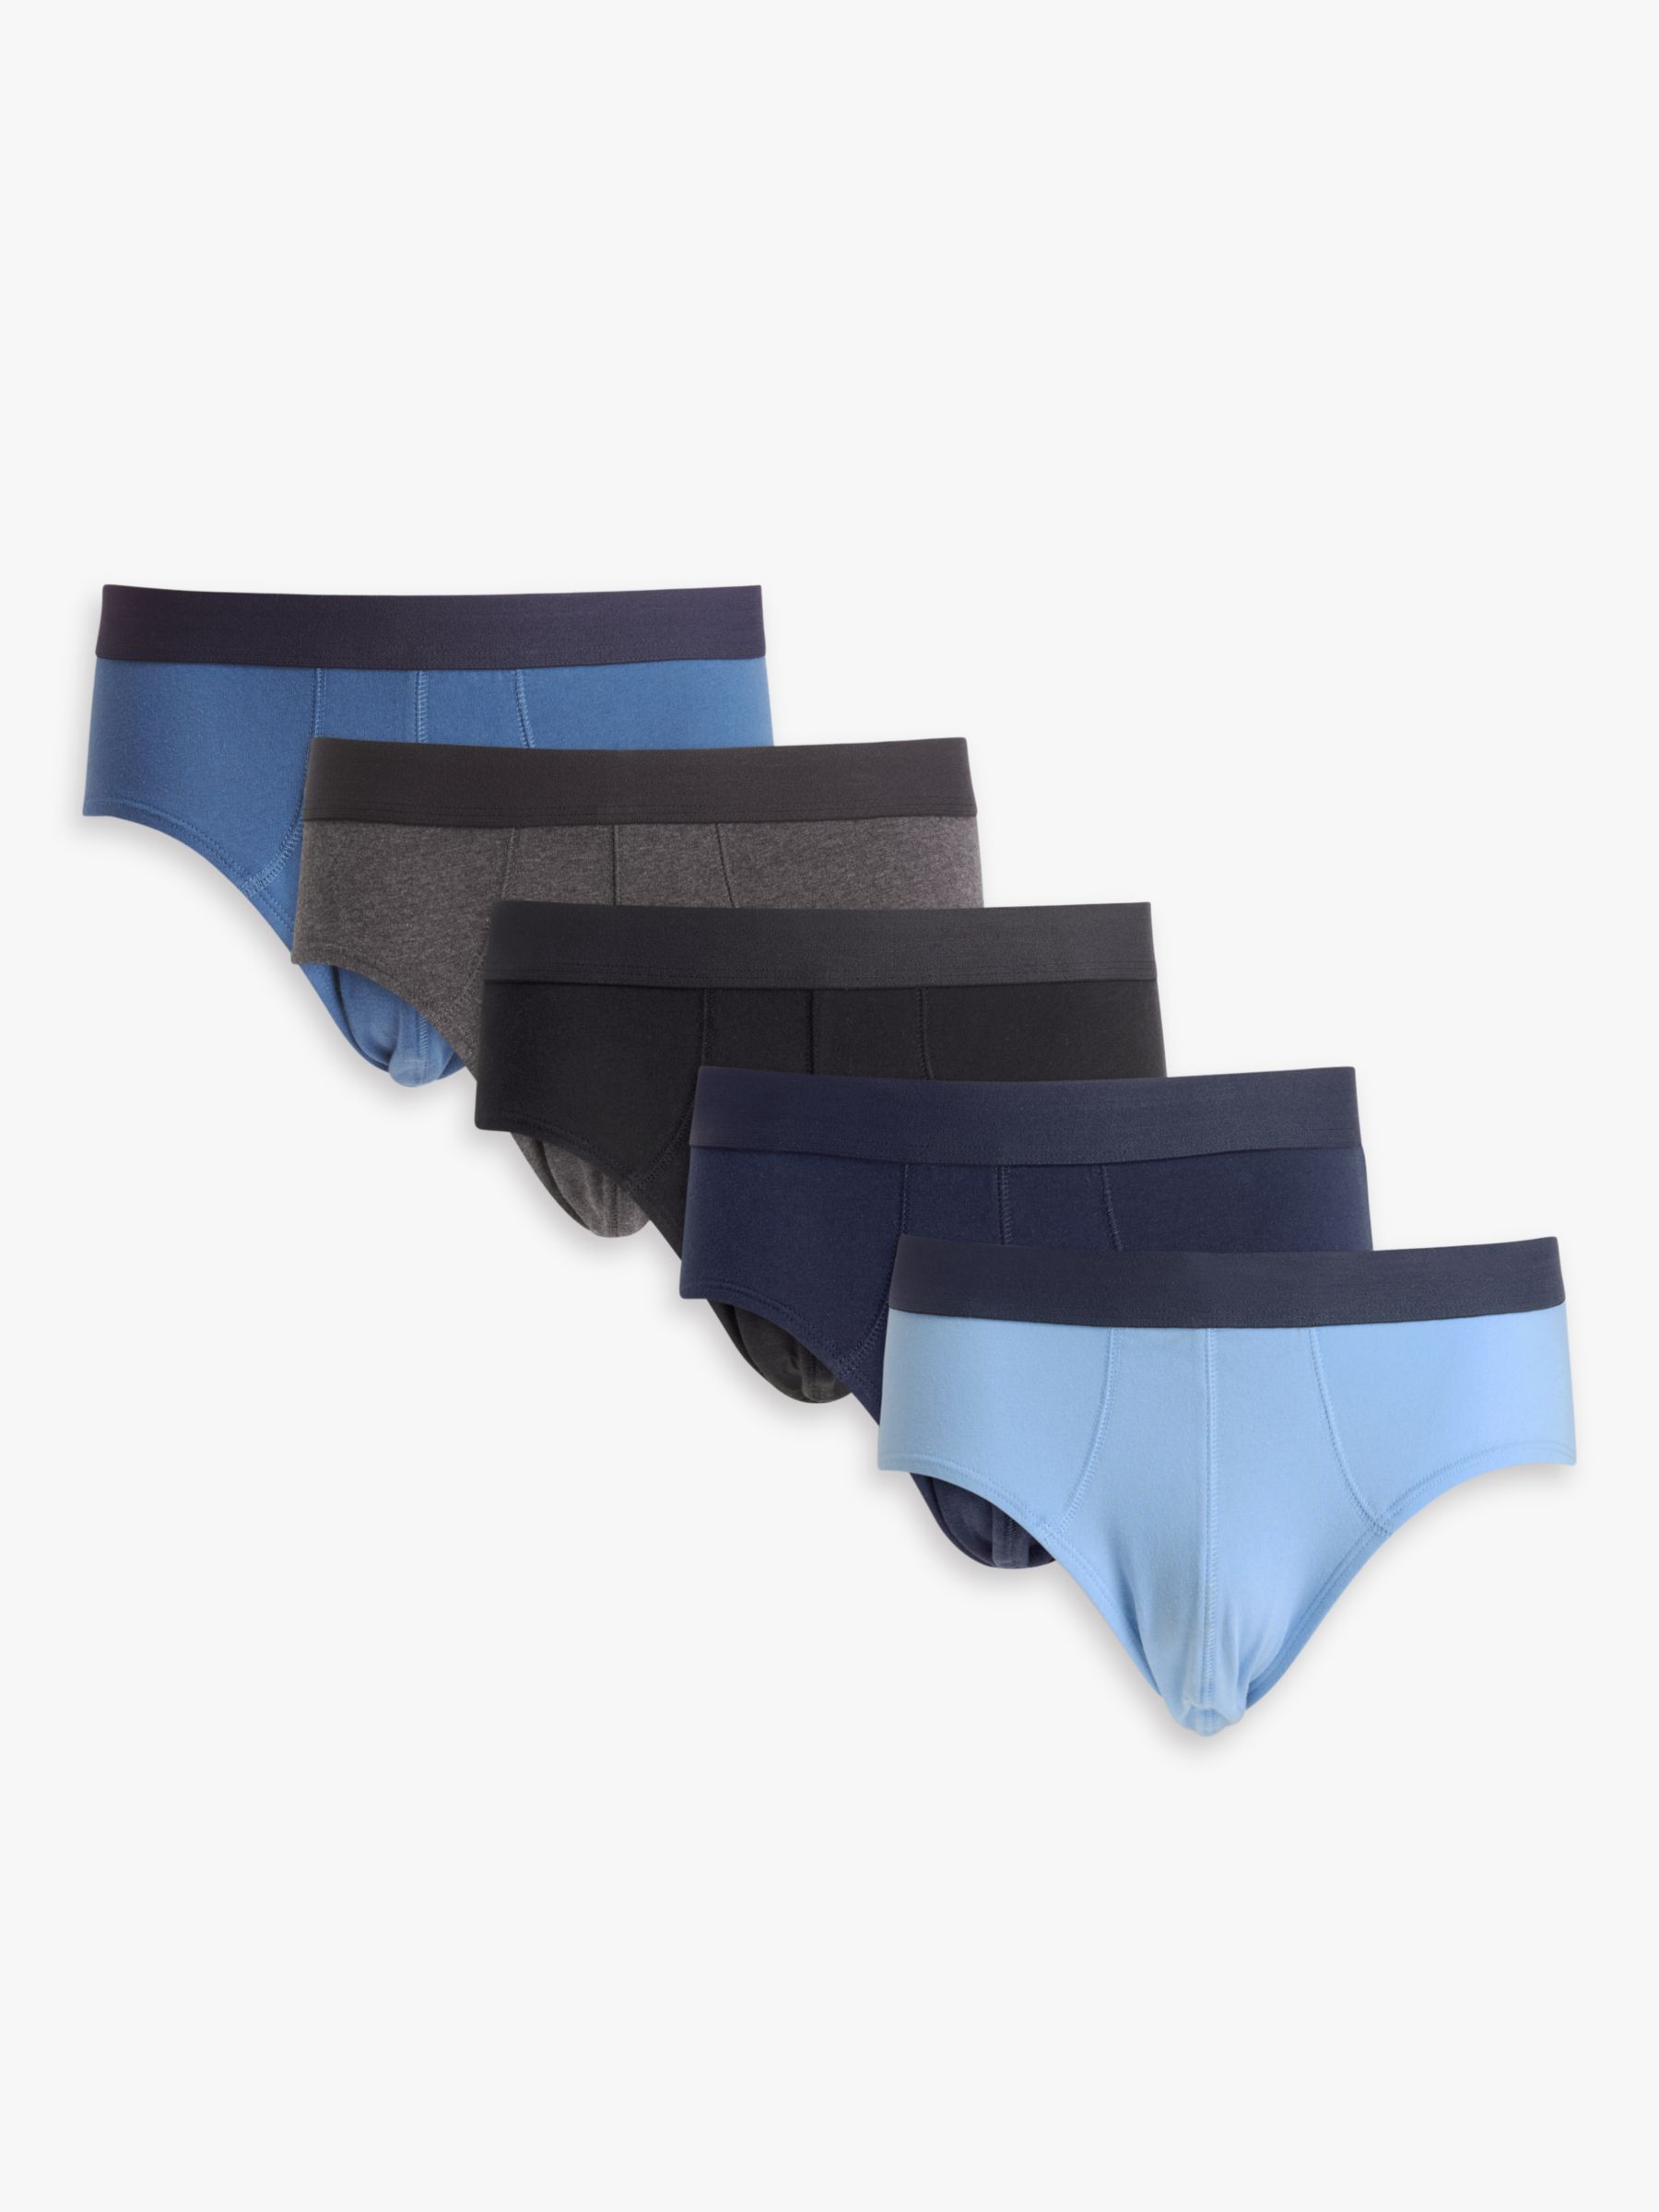 John Lewis ANYDAY Stretch Cotton Briefs, Pack of 5, Blue, S